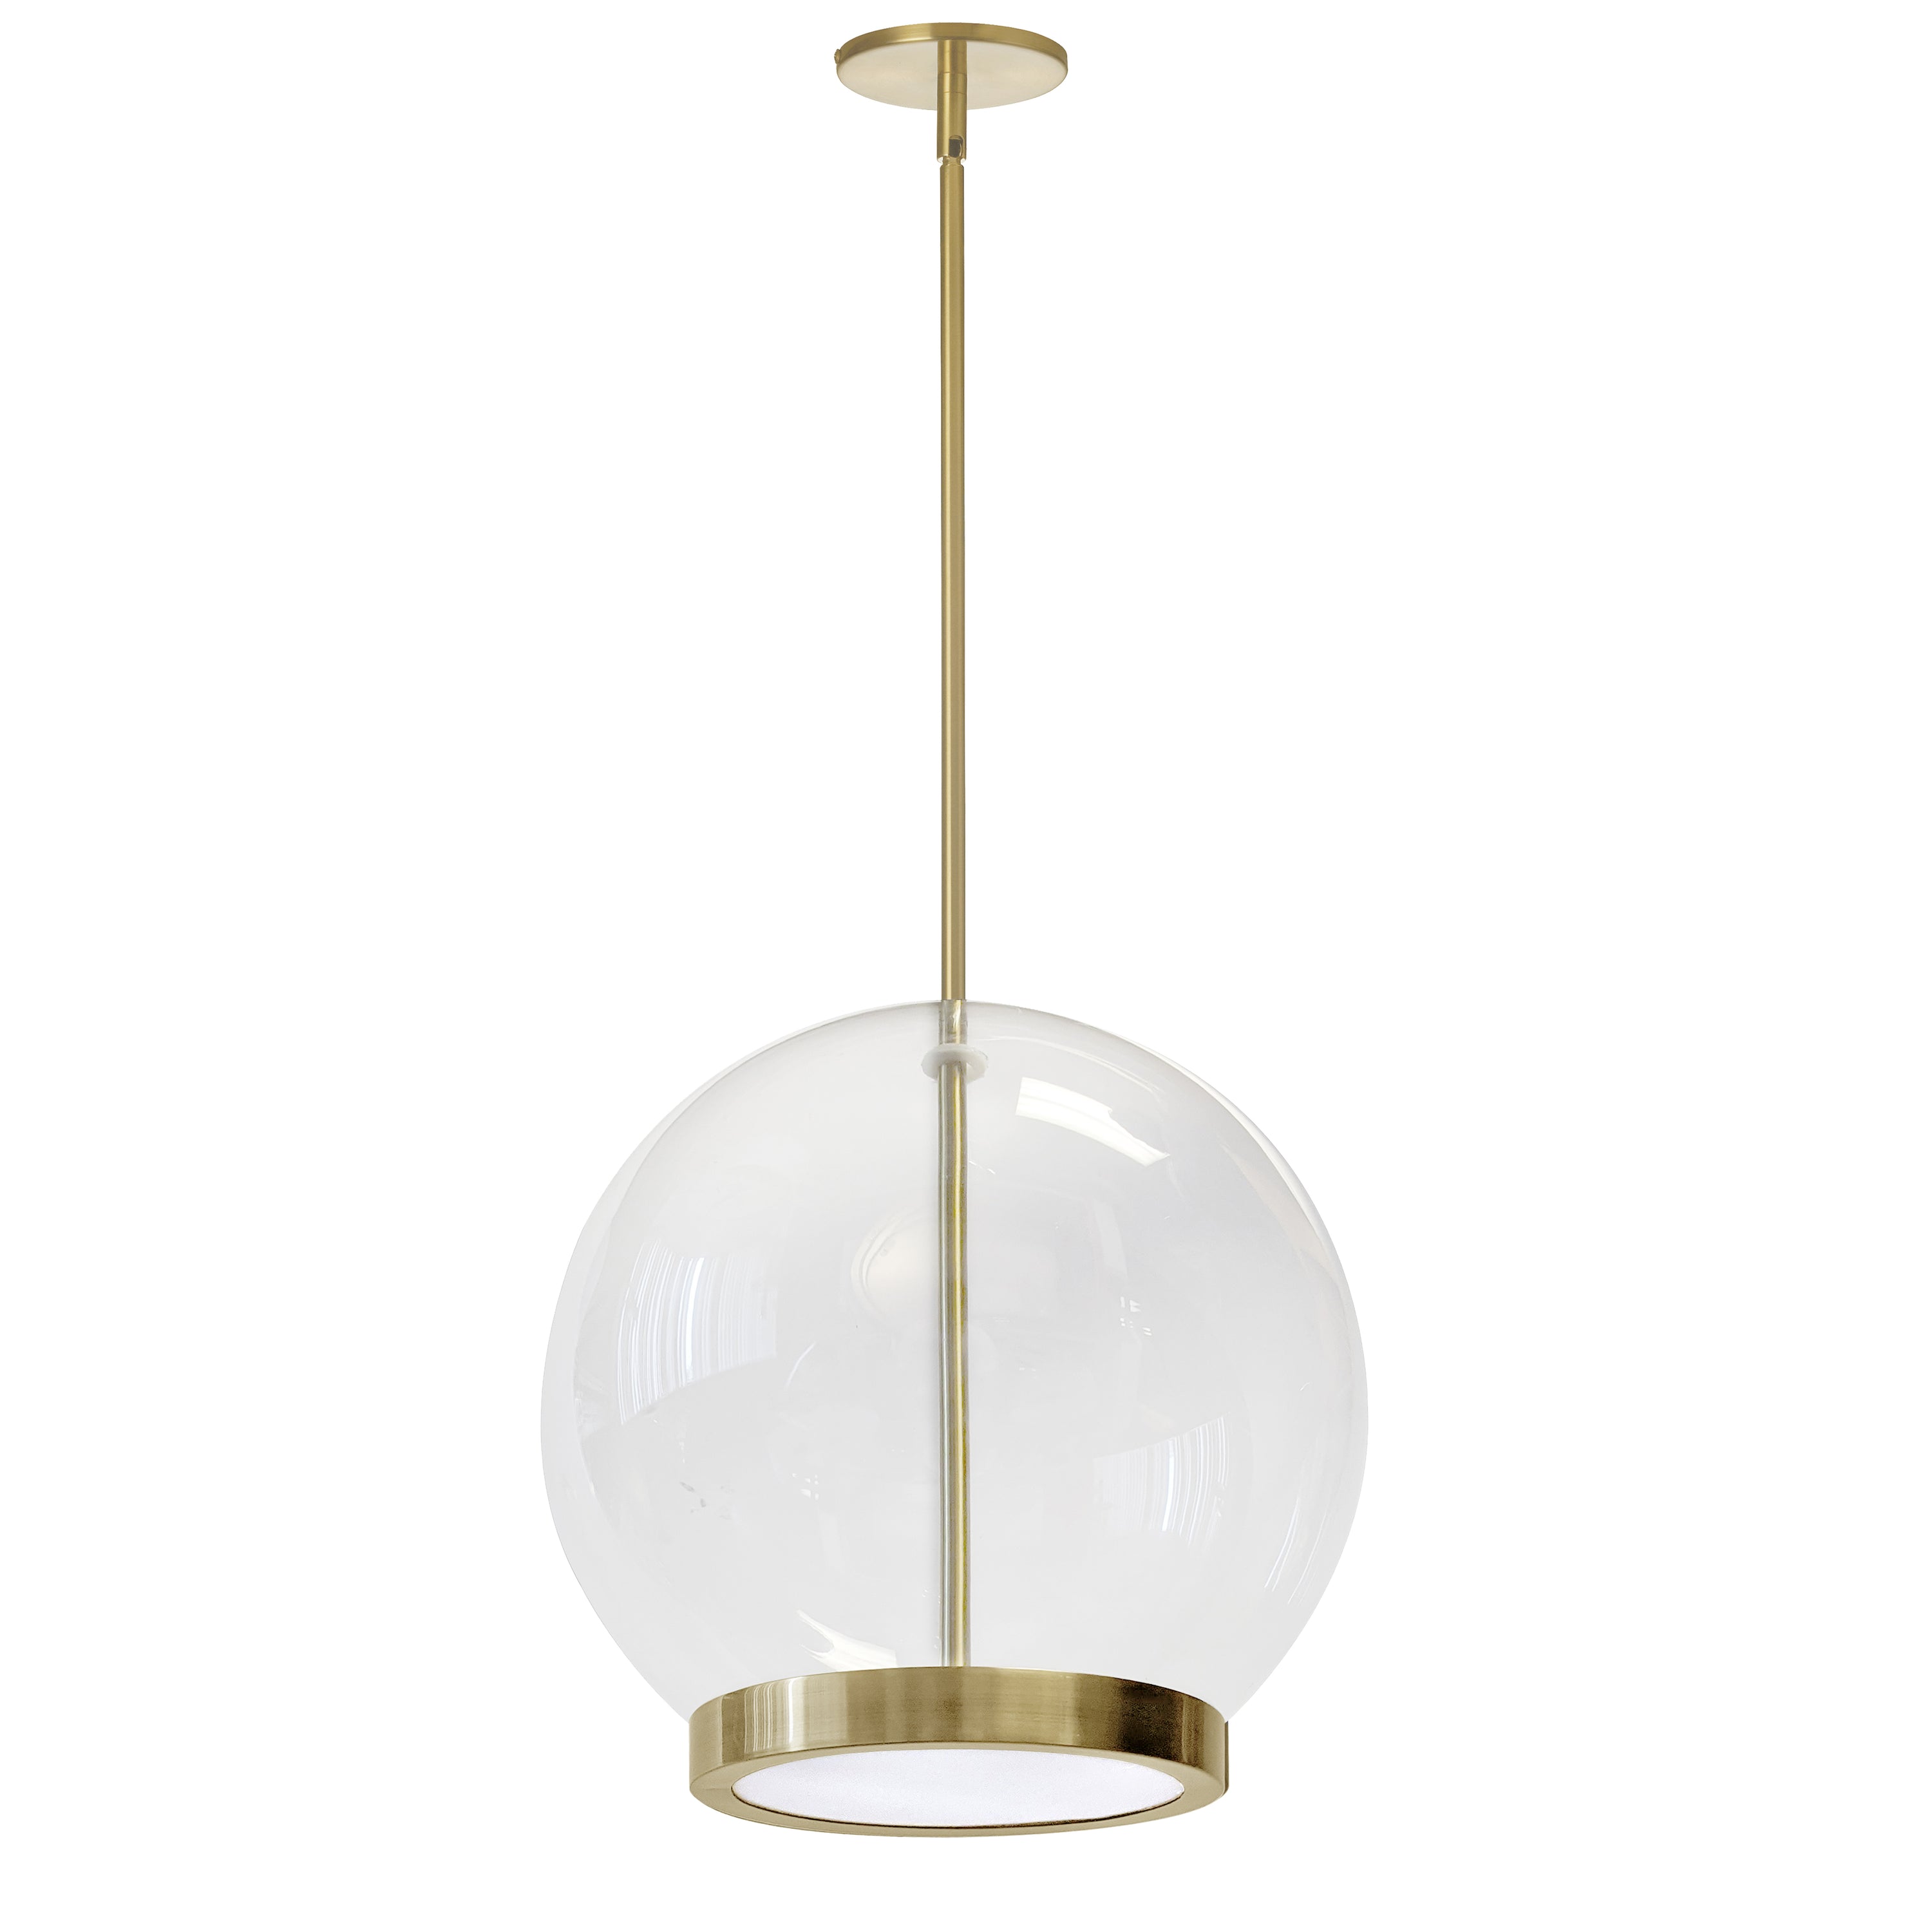 Dainolite Picotas - PTS-1215LEDP-AGB - 15W Pendant, Aged Brass with Clear Glass - Clear